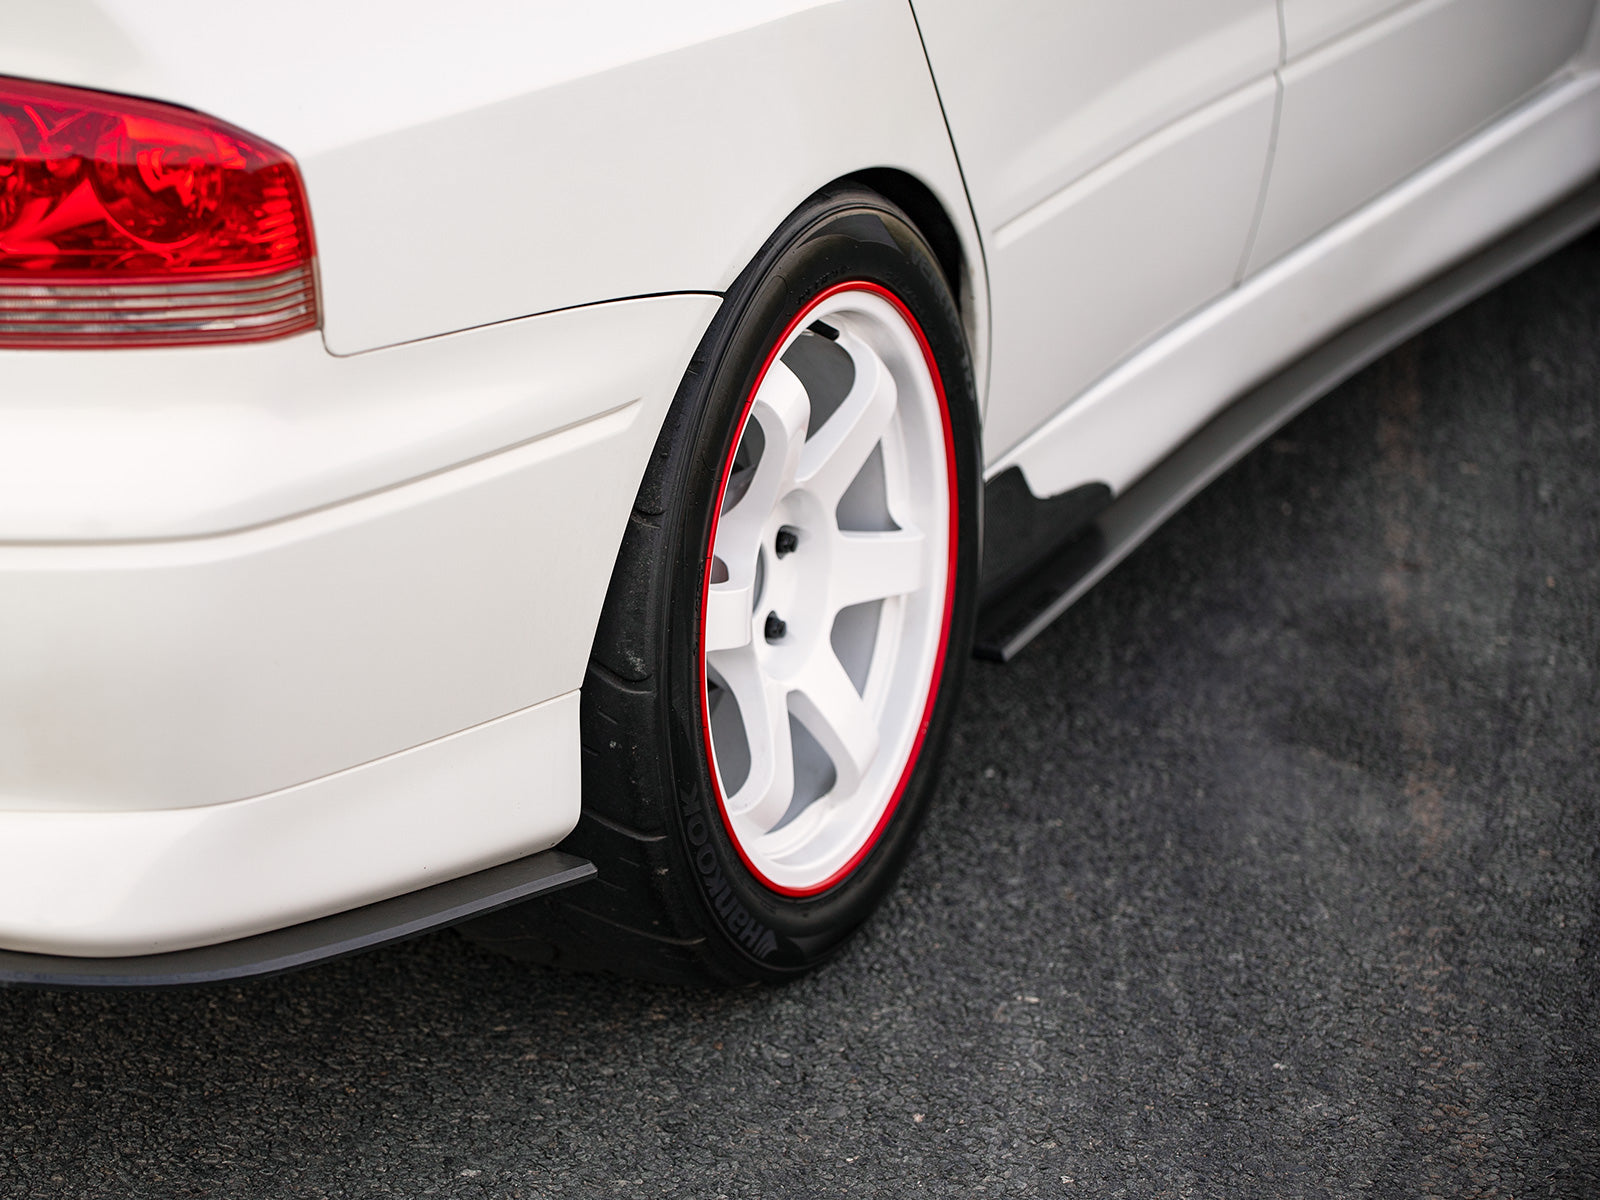 Project Aero Mitsubishi Evo 7 Rear Spats/Pods are the best way to compliment any OEM rear bumper